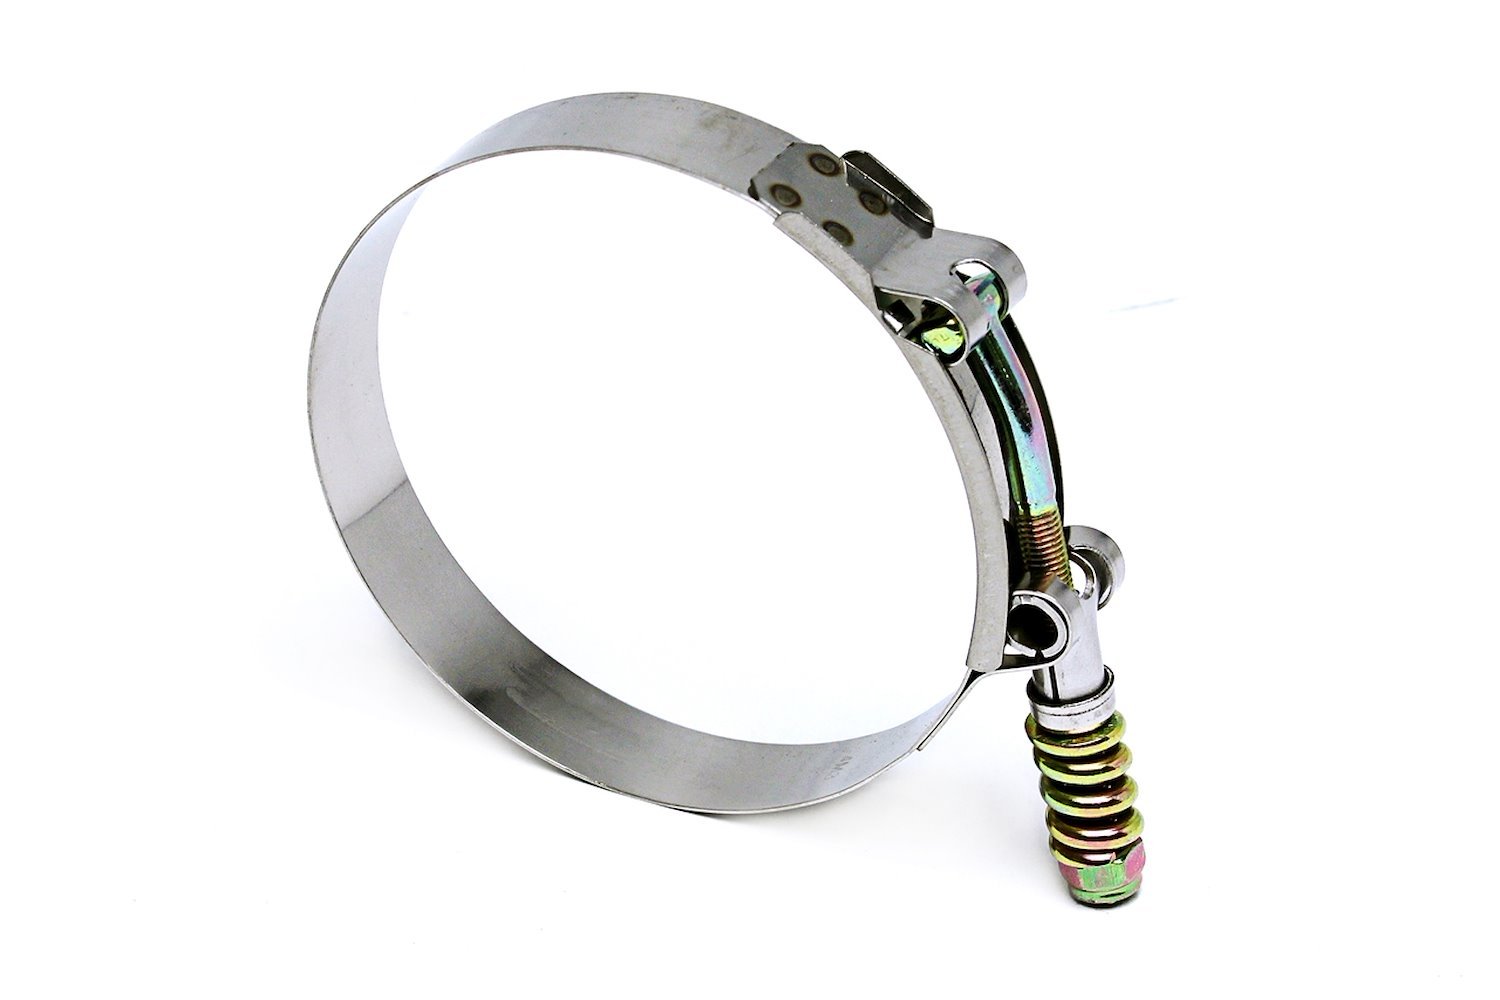 SLTC-825 Stainless Steel Spring Loaded T-Bolt Hose Clamp, Size #236, Range: 8.25 in.-8.56 in.